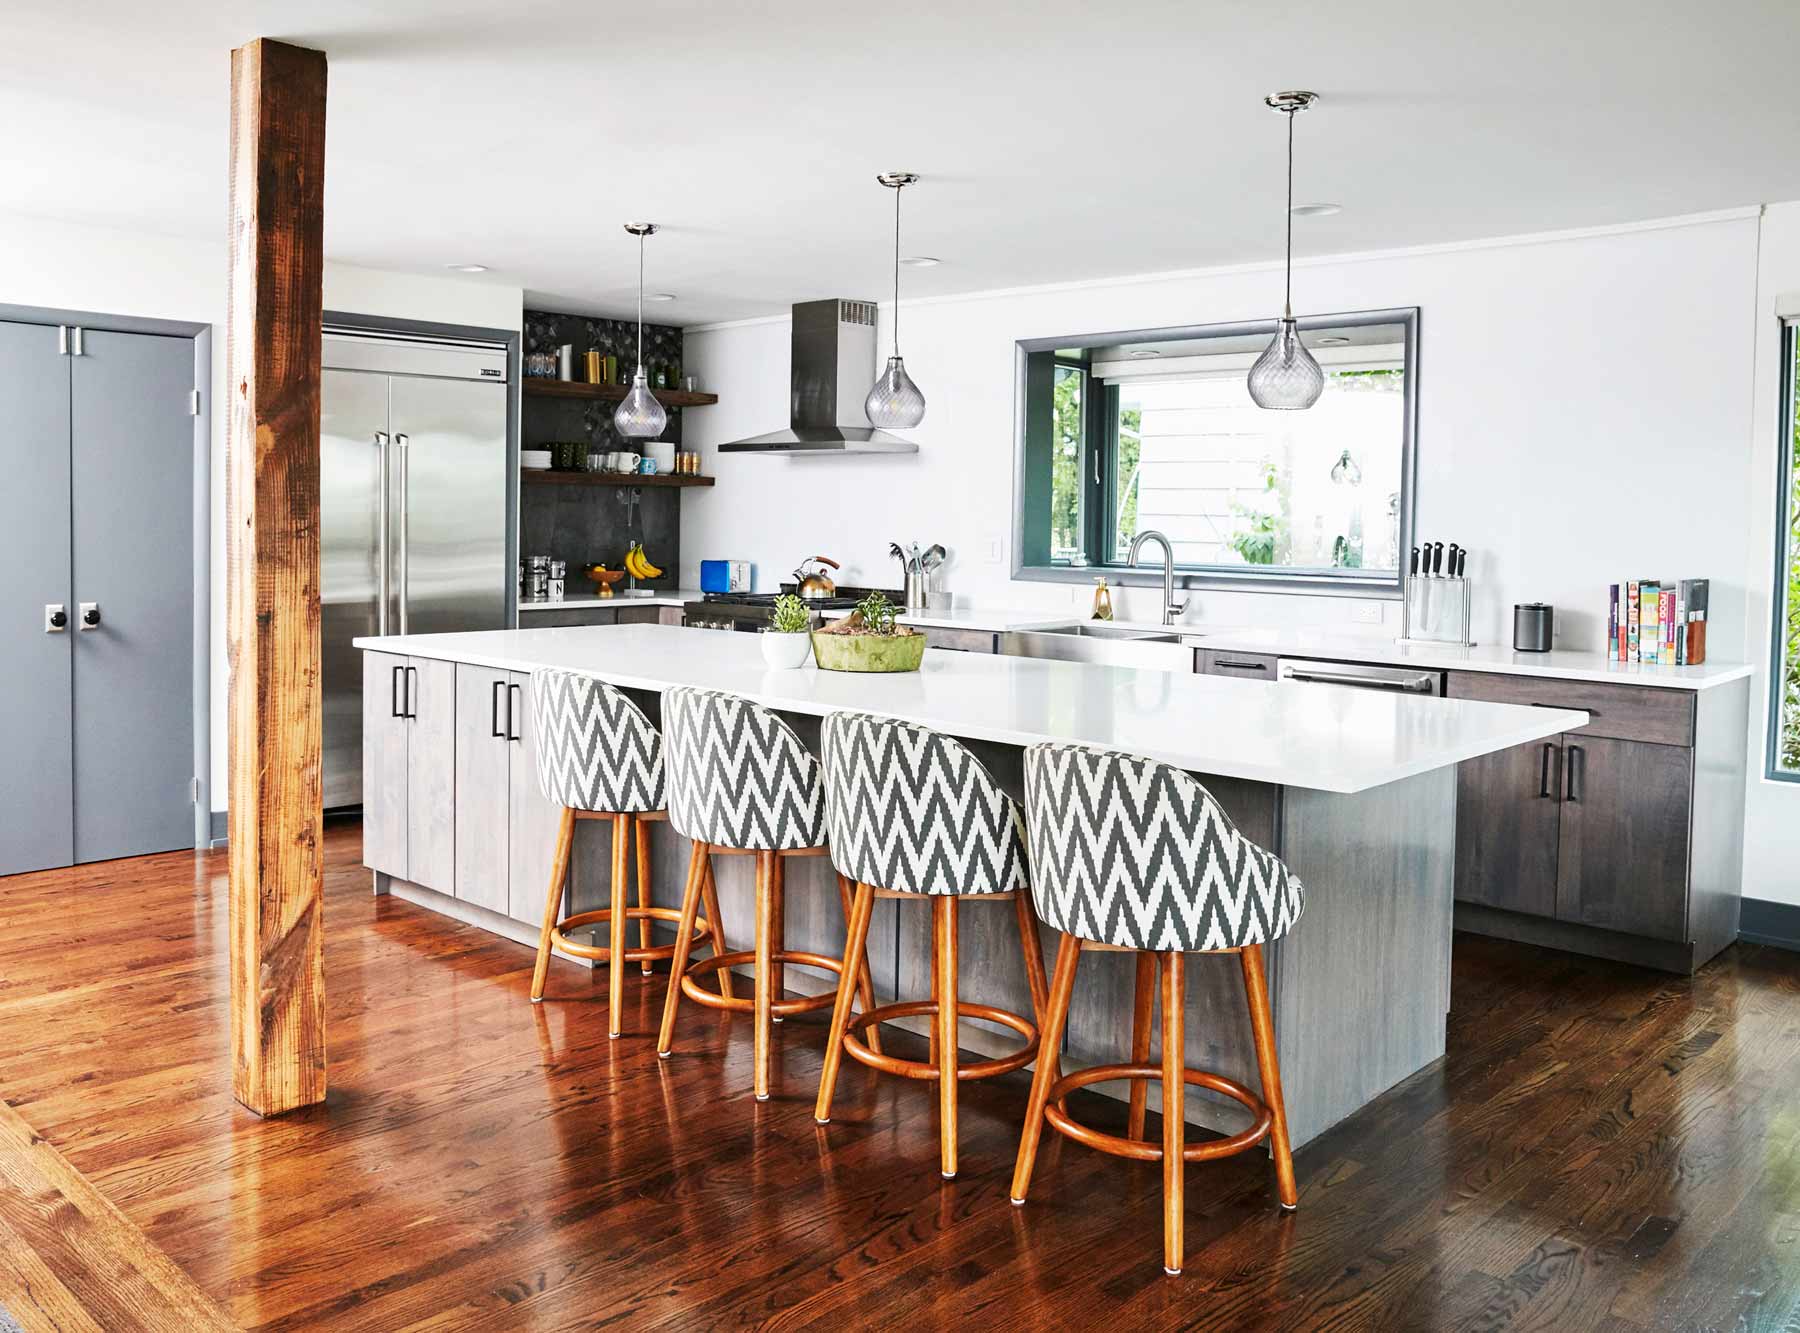 What Kitchen Island Suits Best For Your Kitchen Needs